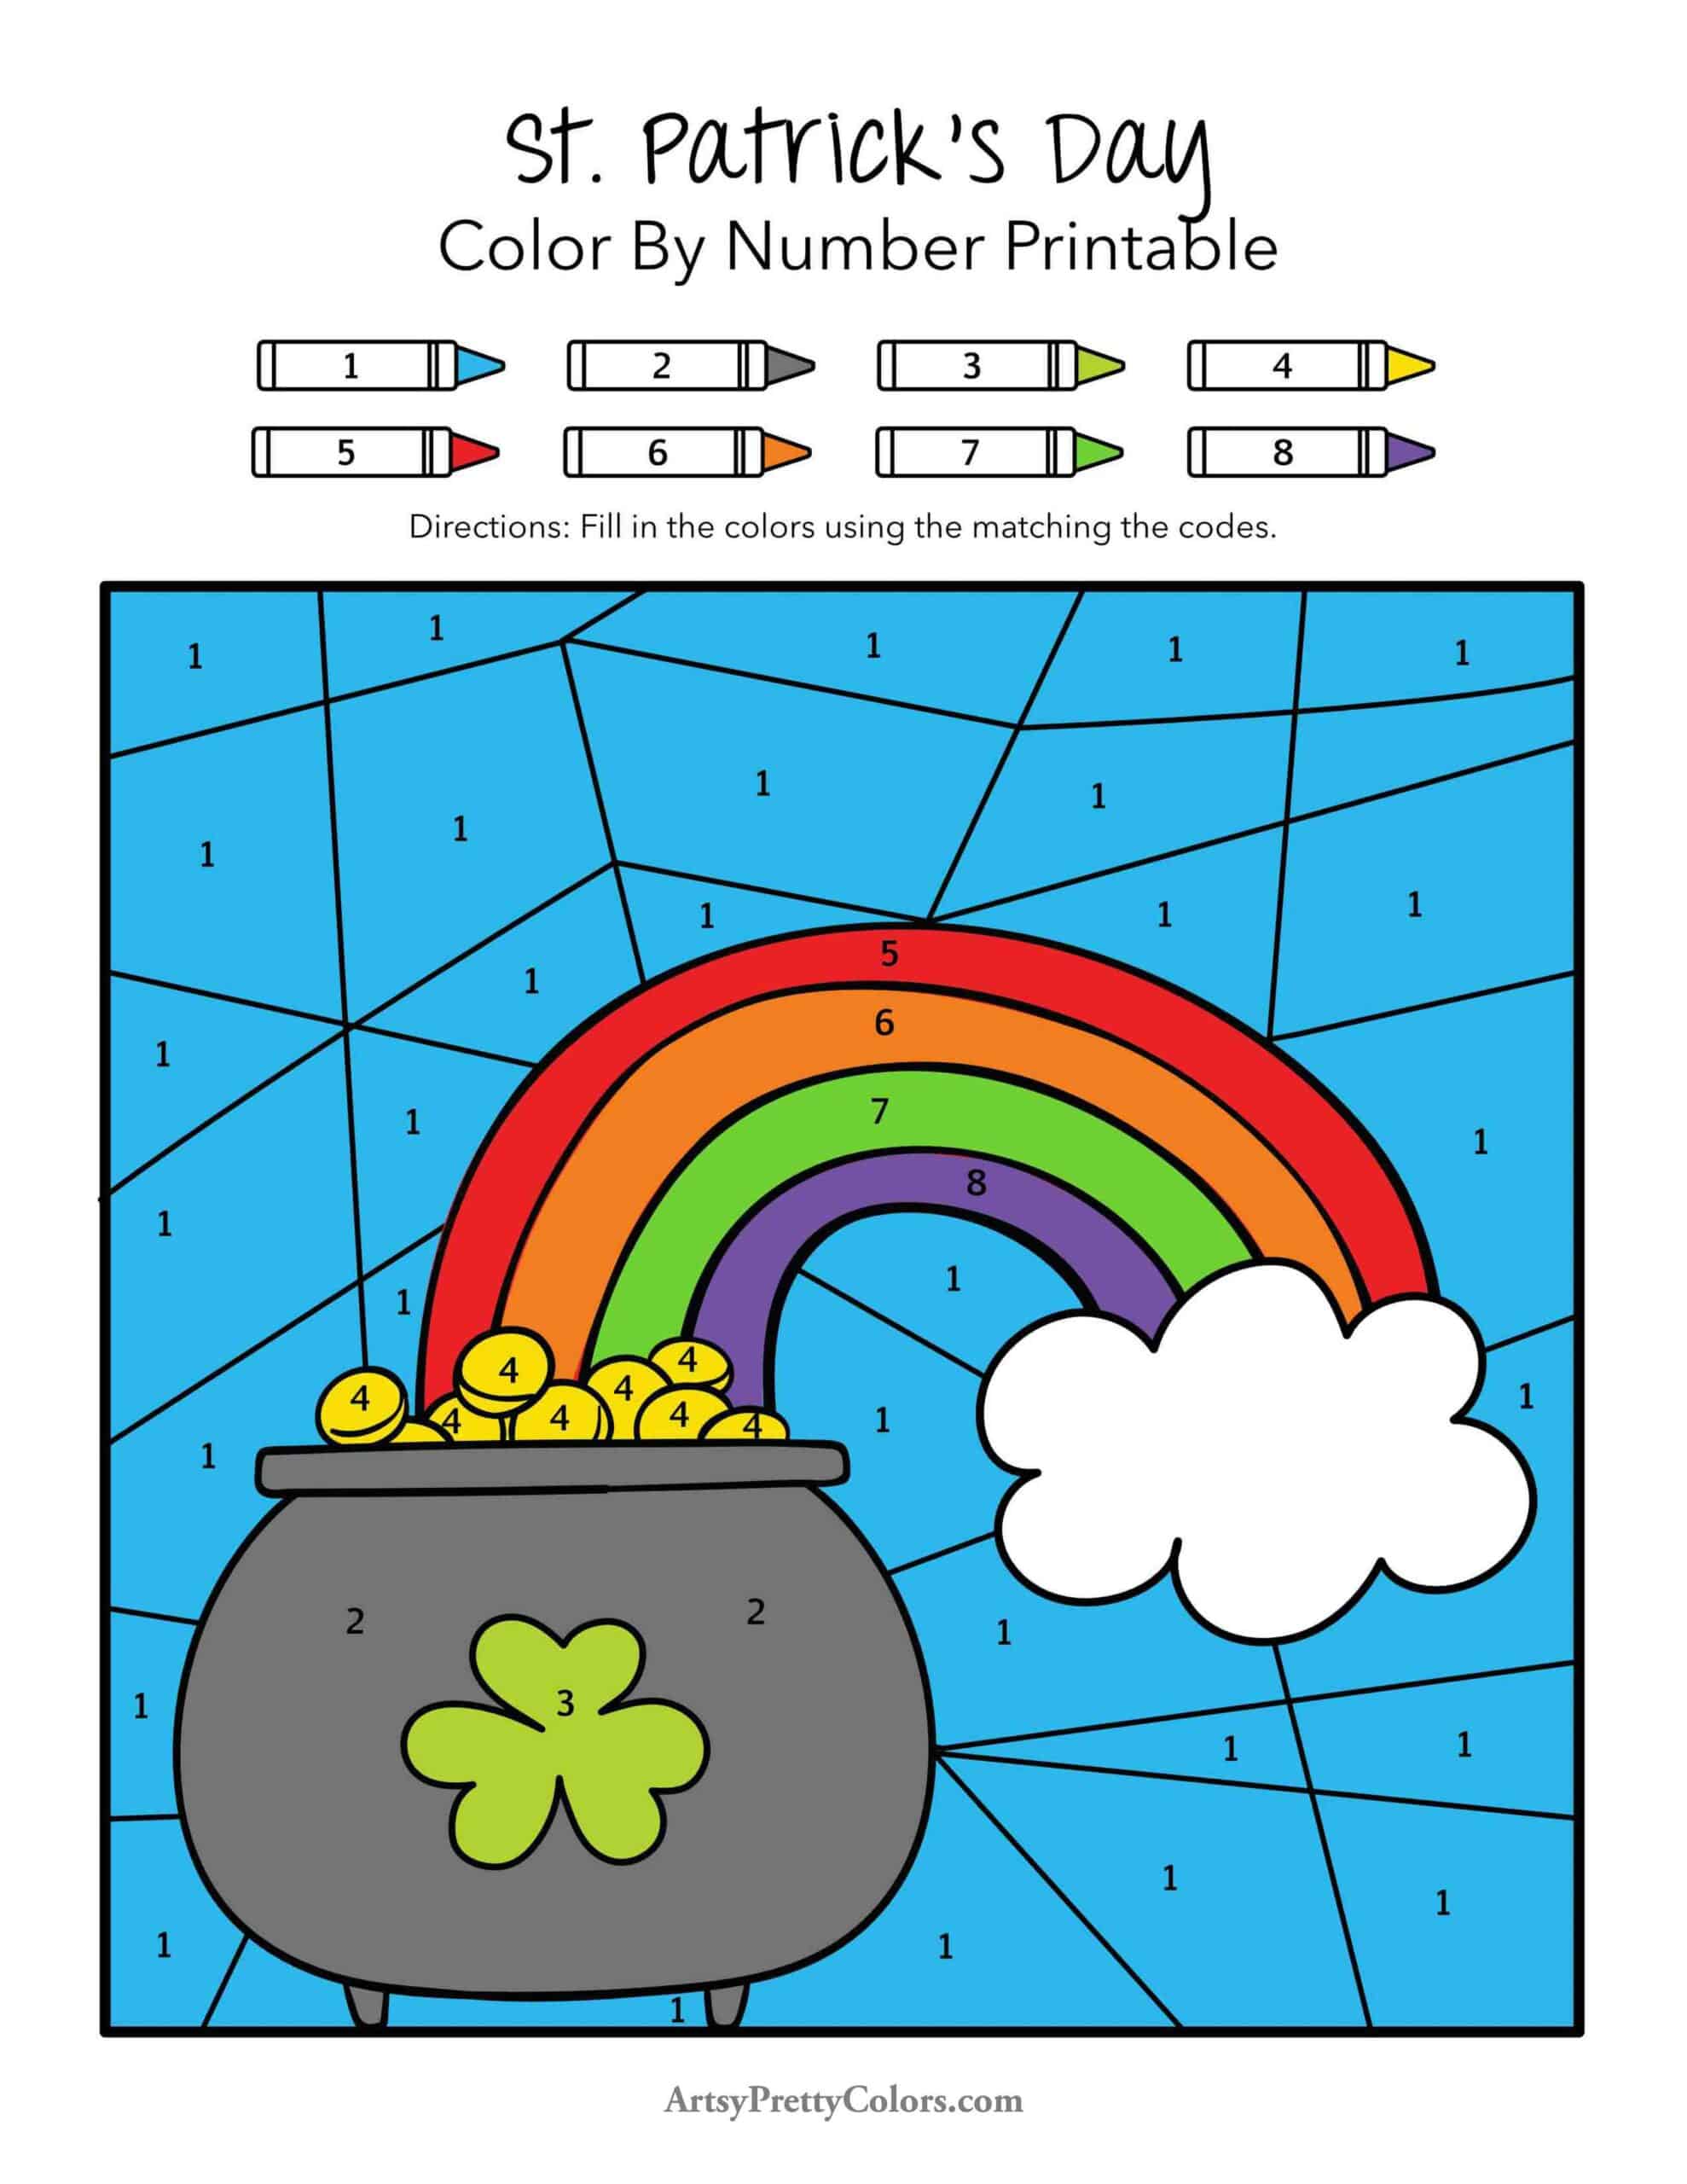 a colored in St patricks printable of a pot of gold with a rainbow leading into it. The image is sectioned off with numbers in each section that correspond with a color key at the top of the page.